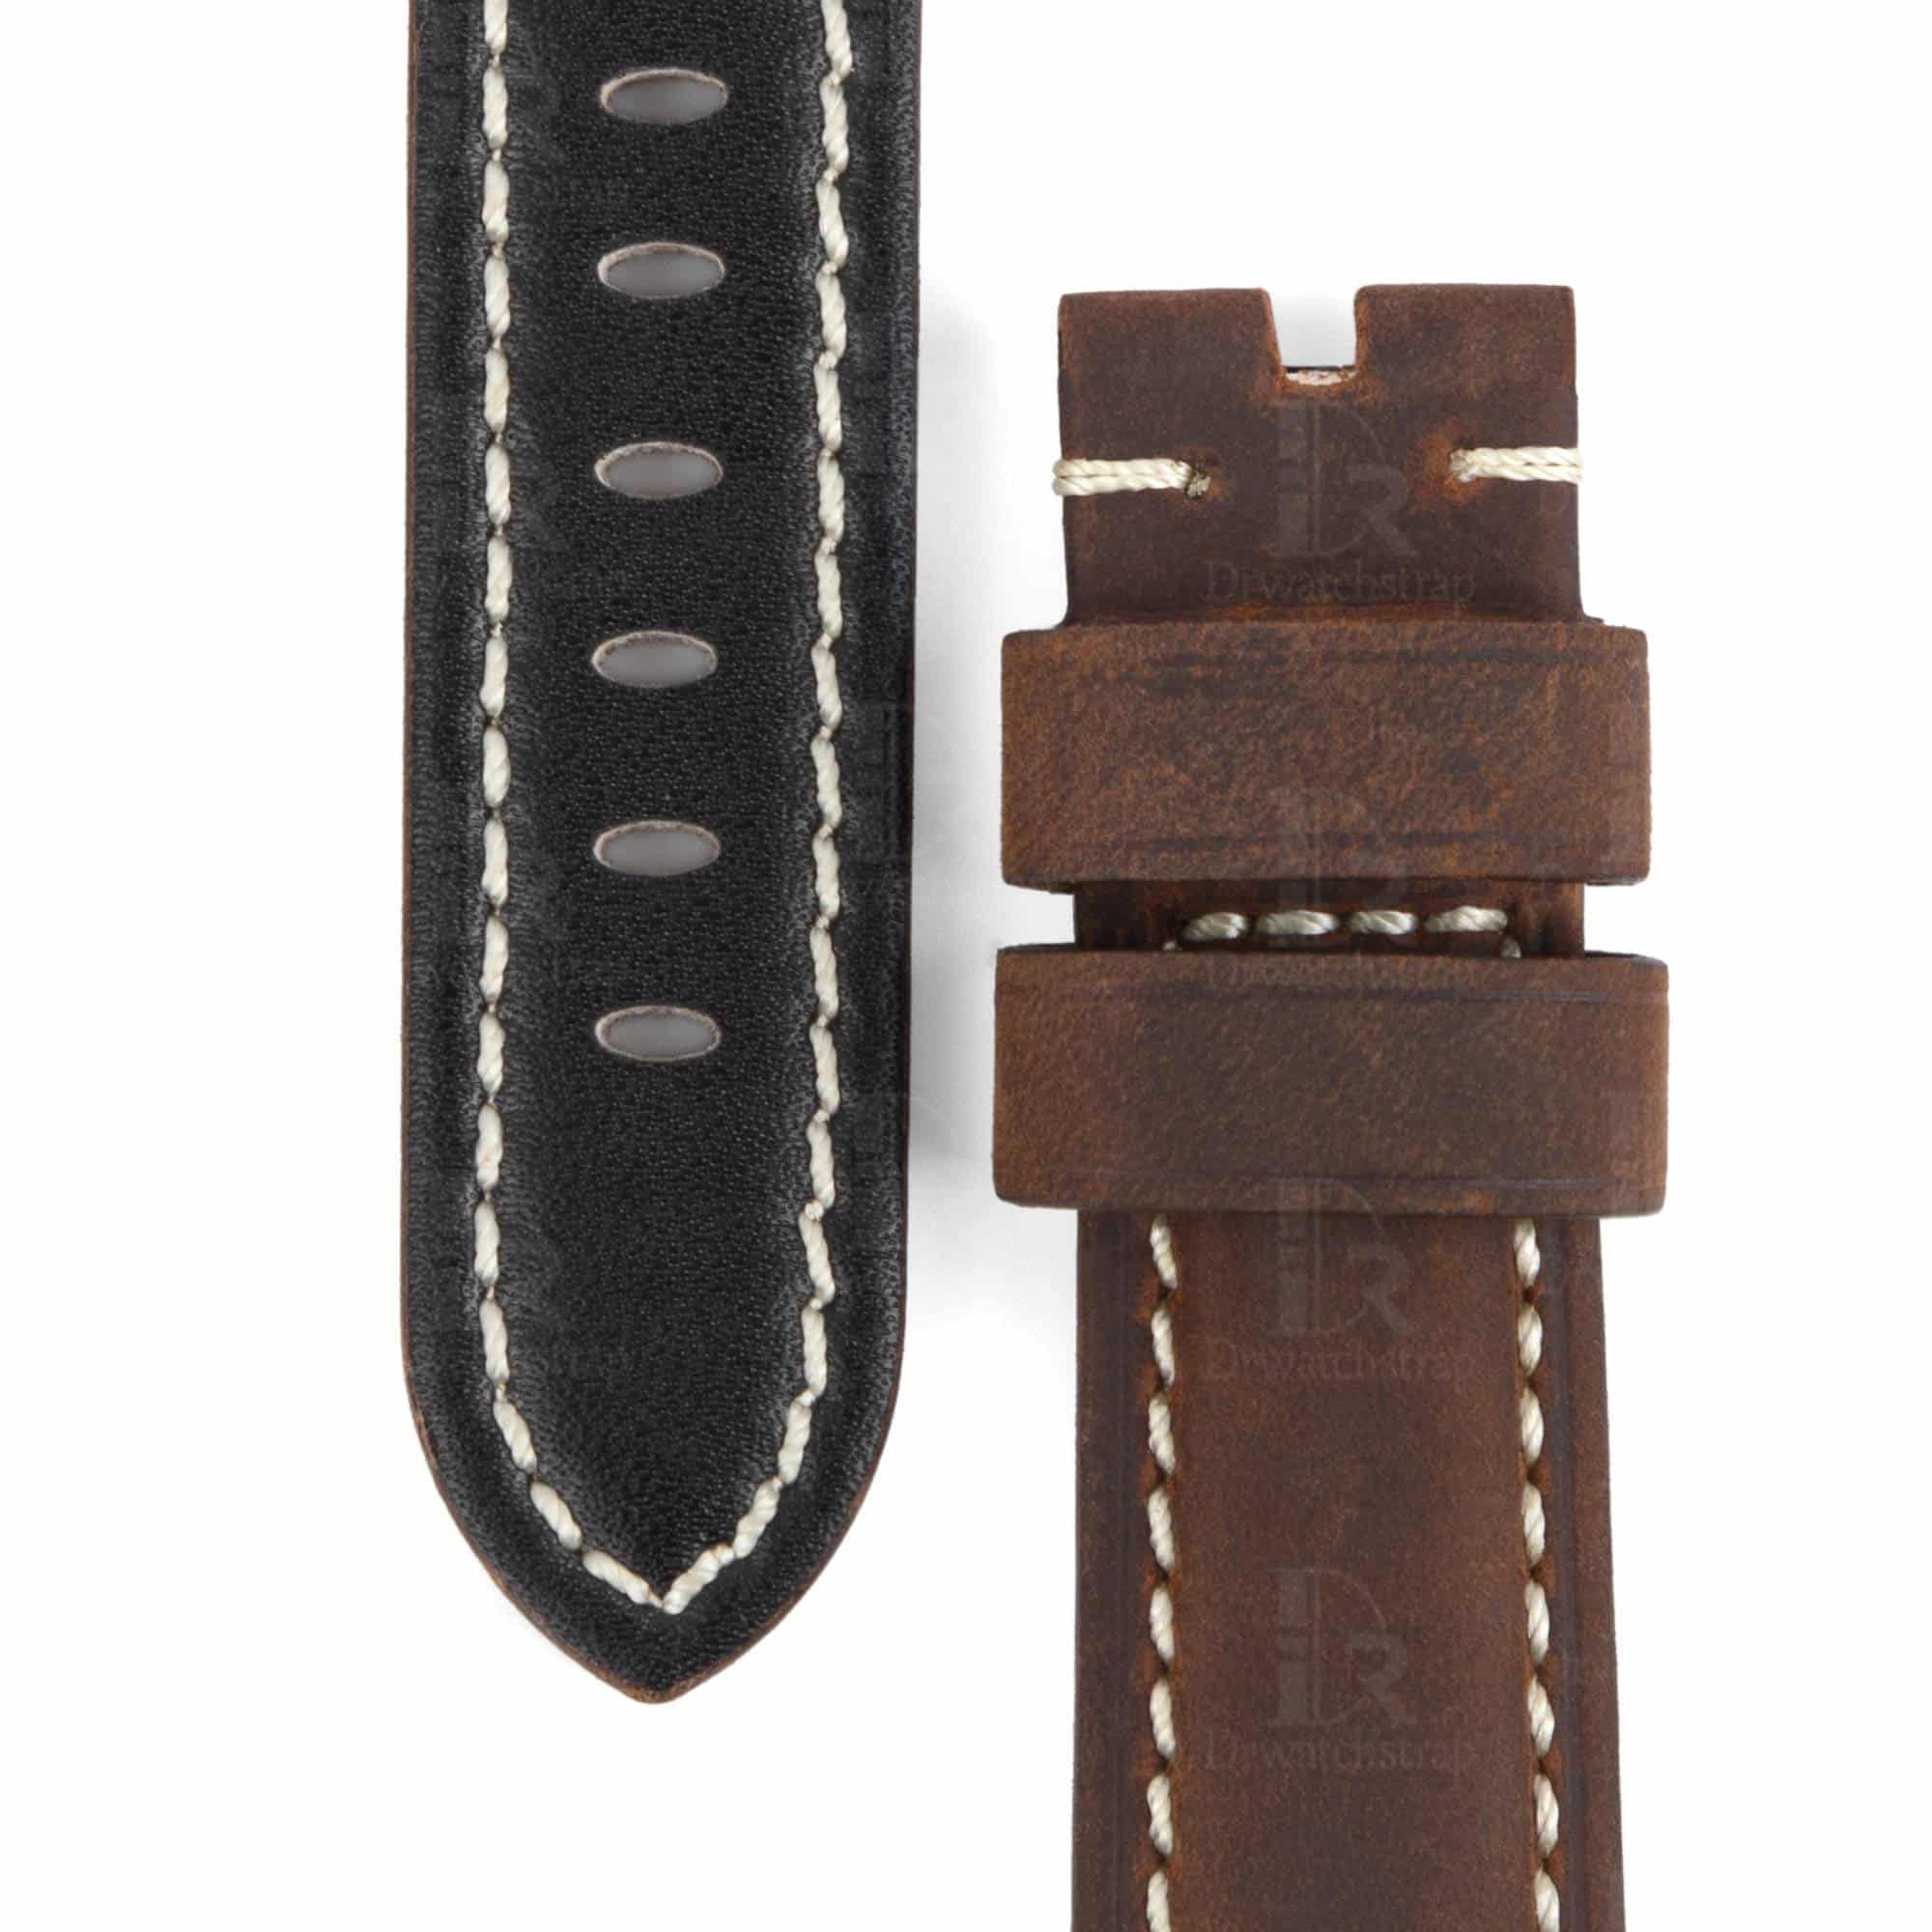 Best quality brown calfskin Panerai replacement strap 24mm 22mm 26mm & leather OEM Custom watch band for Panerai Luminor Due Radiomir watches from DR Watchstrap - Shop and buy calf leather handmade OEM straps and watch bands online at a low price